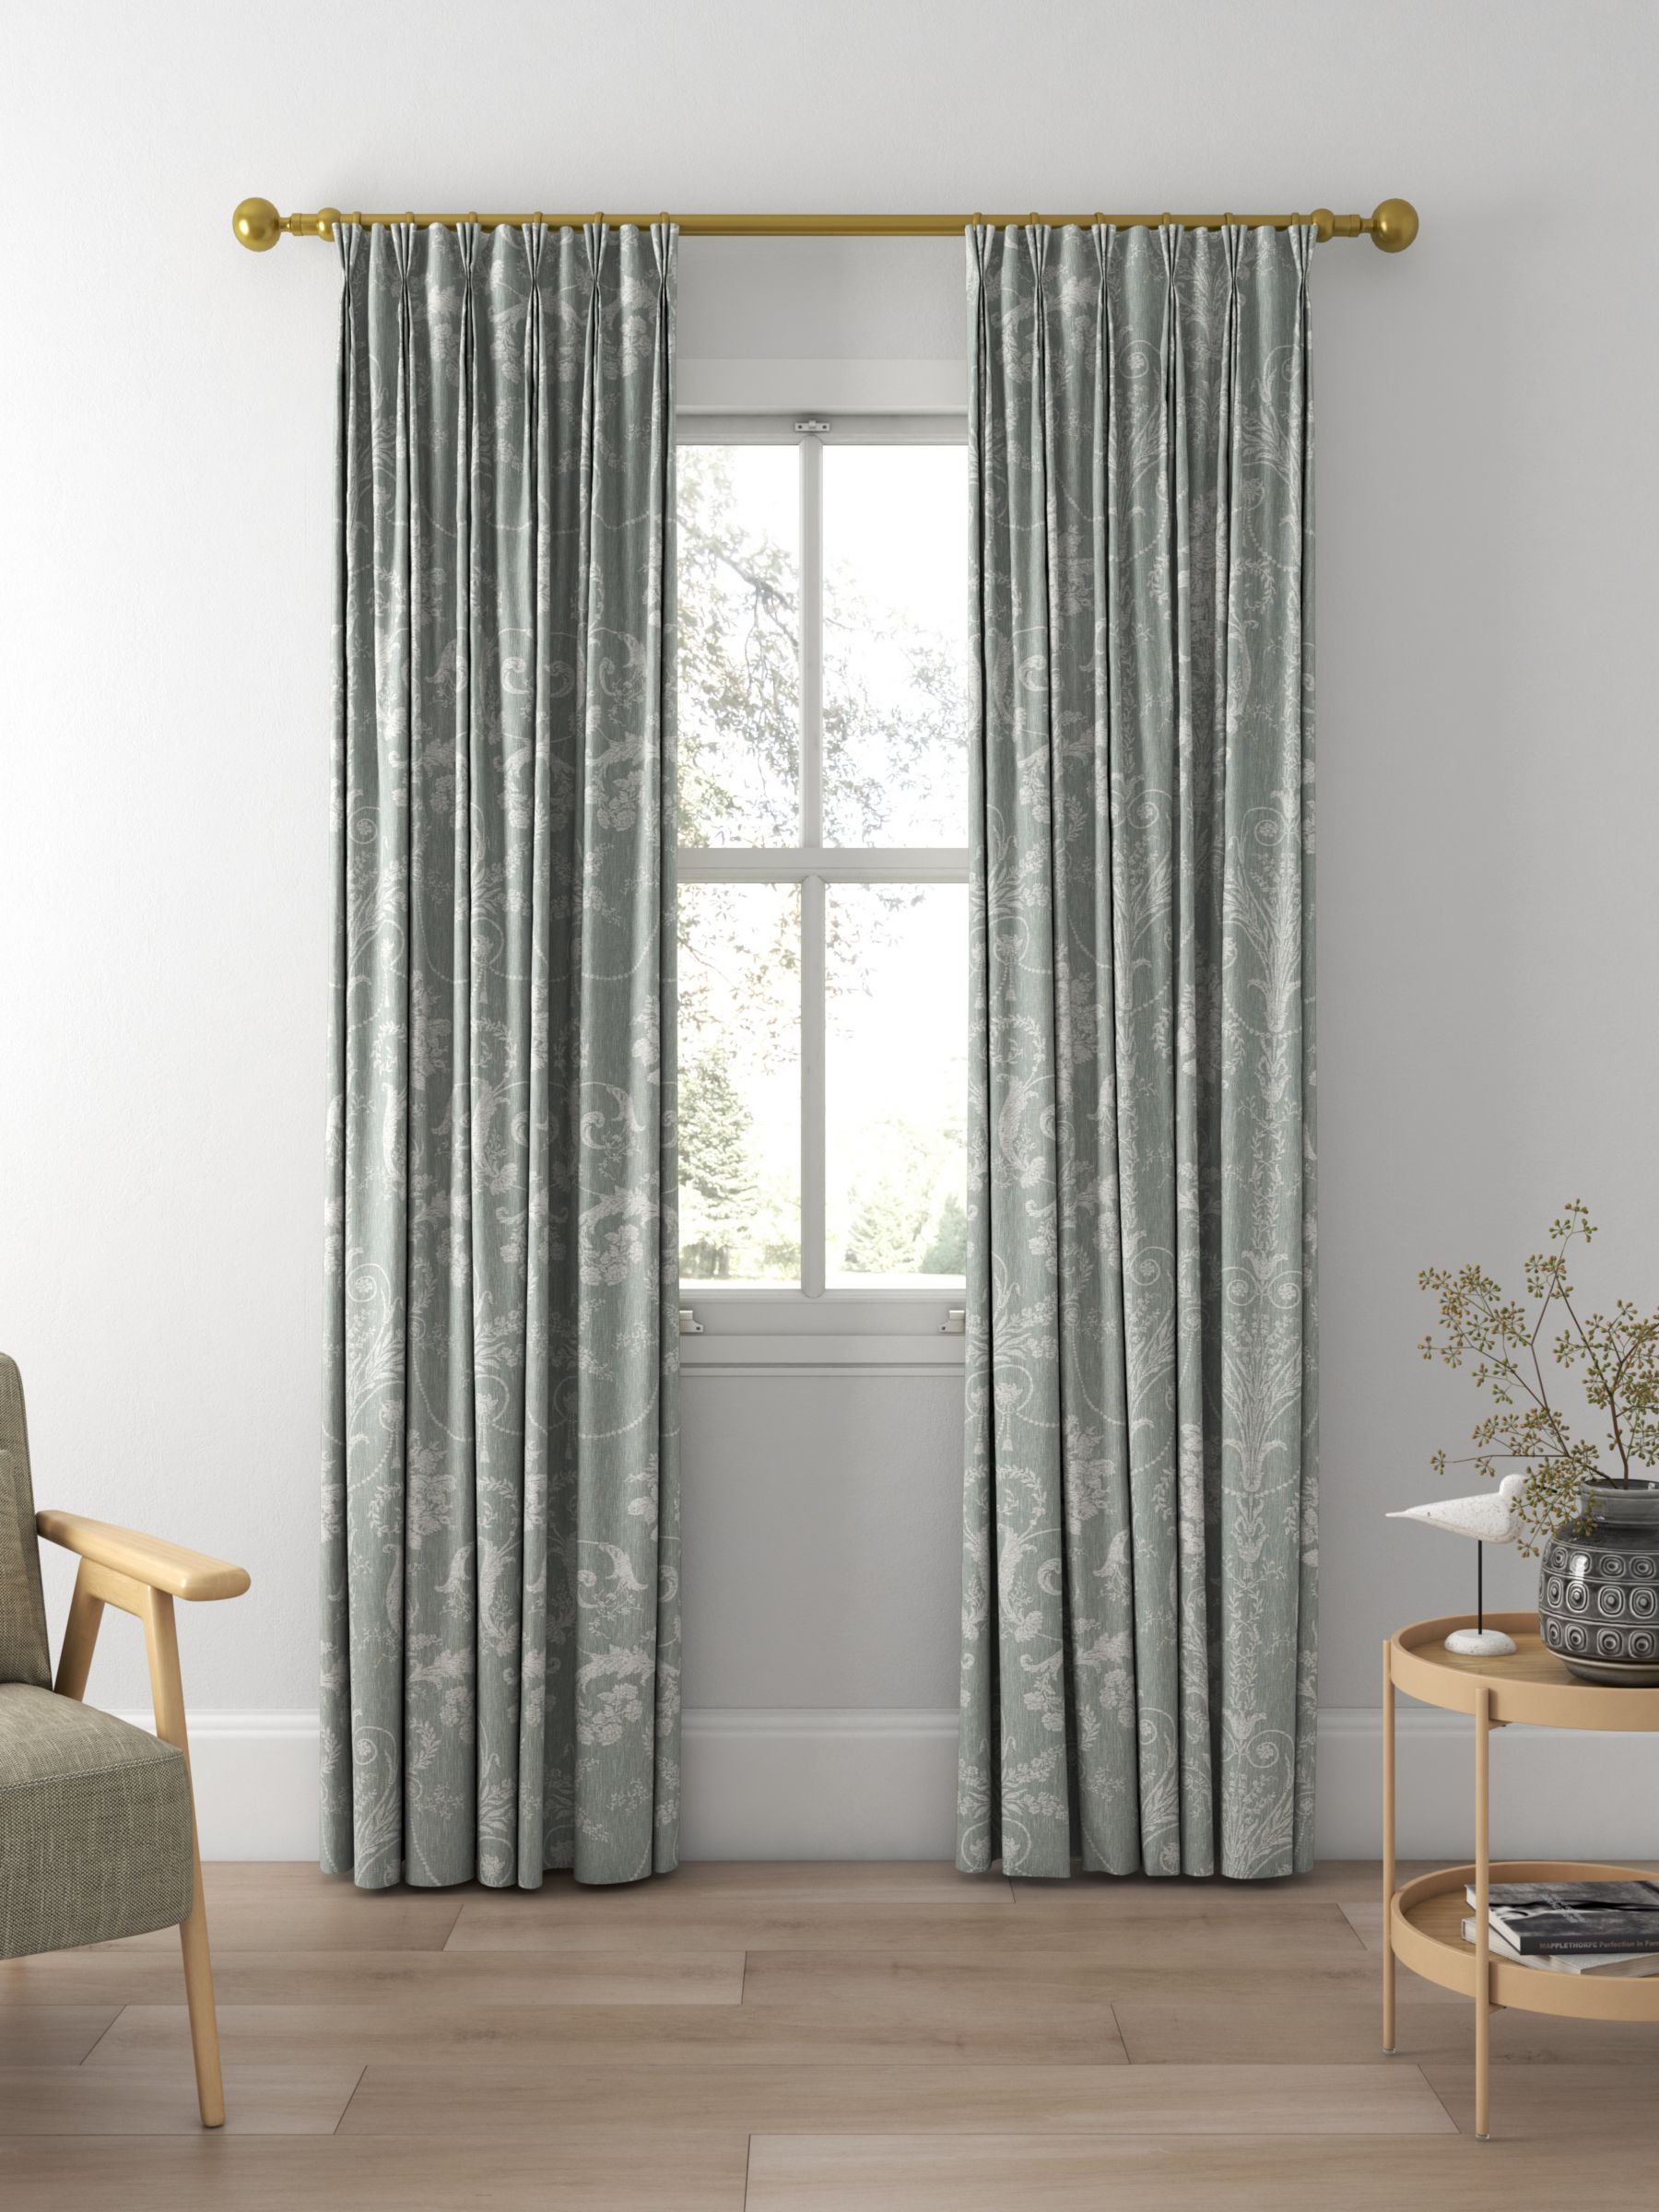 Laura Ashley Josette Woven Made to Measure Curtains, Grey Green